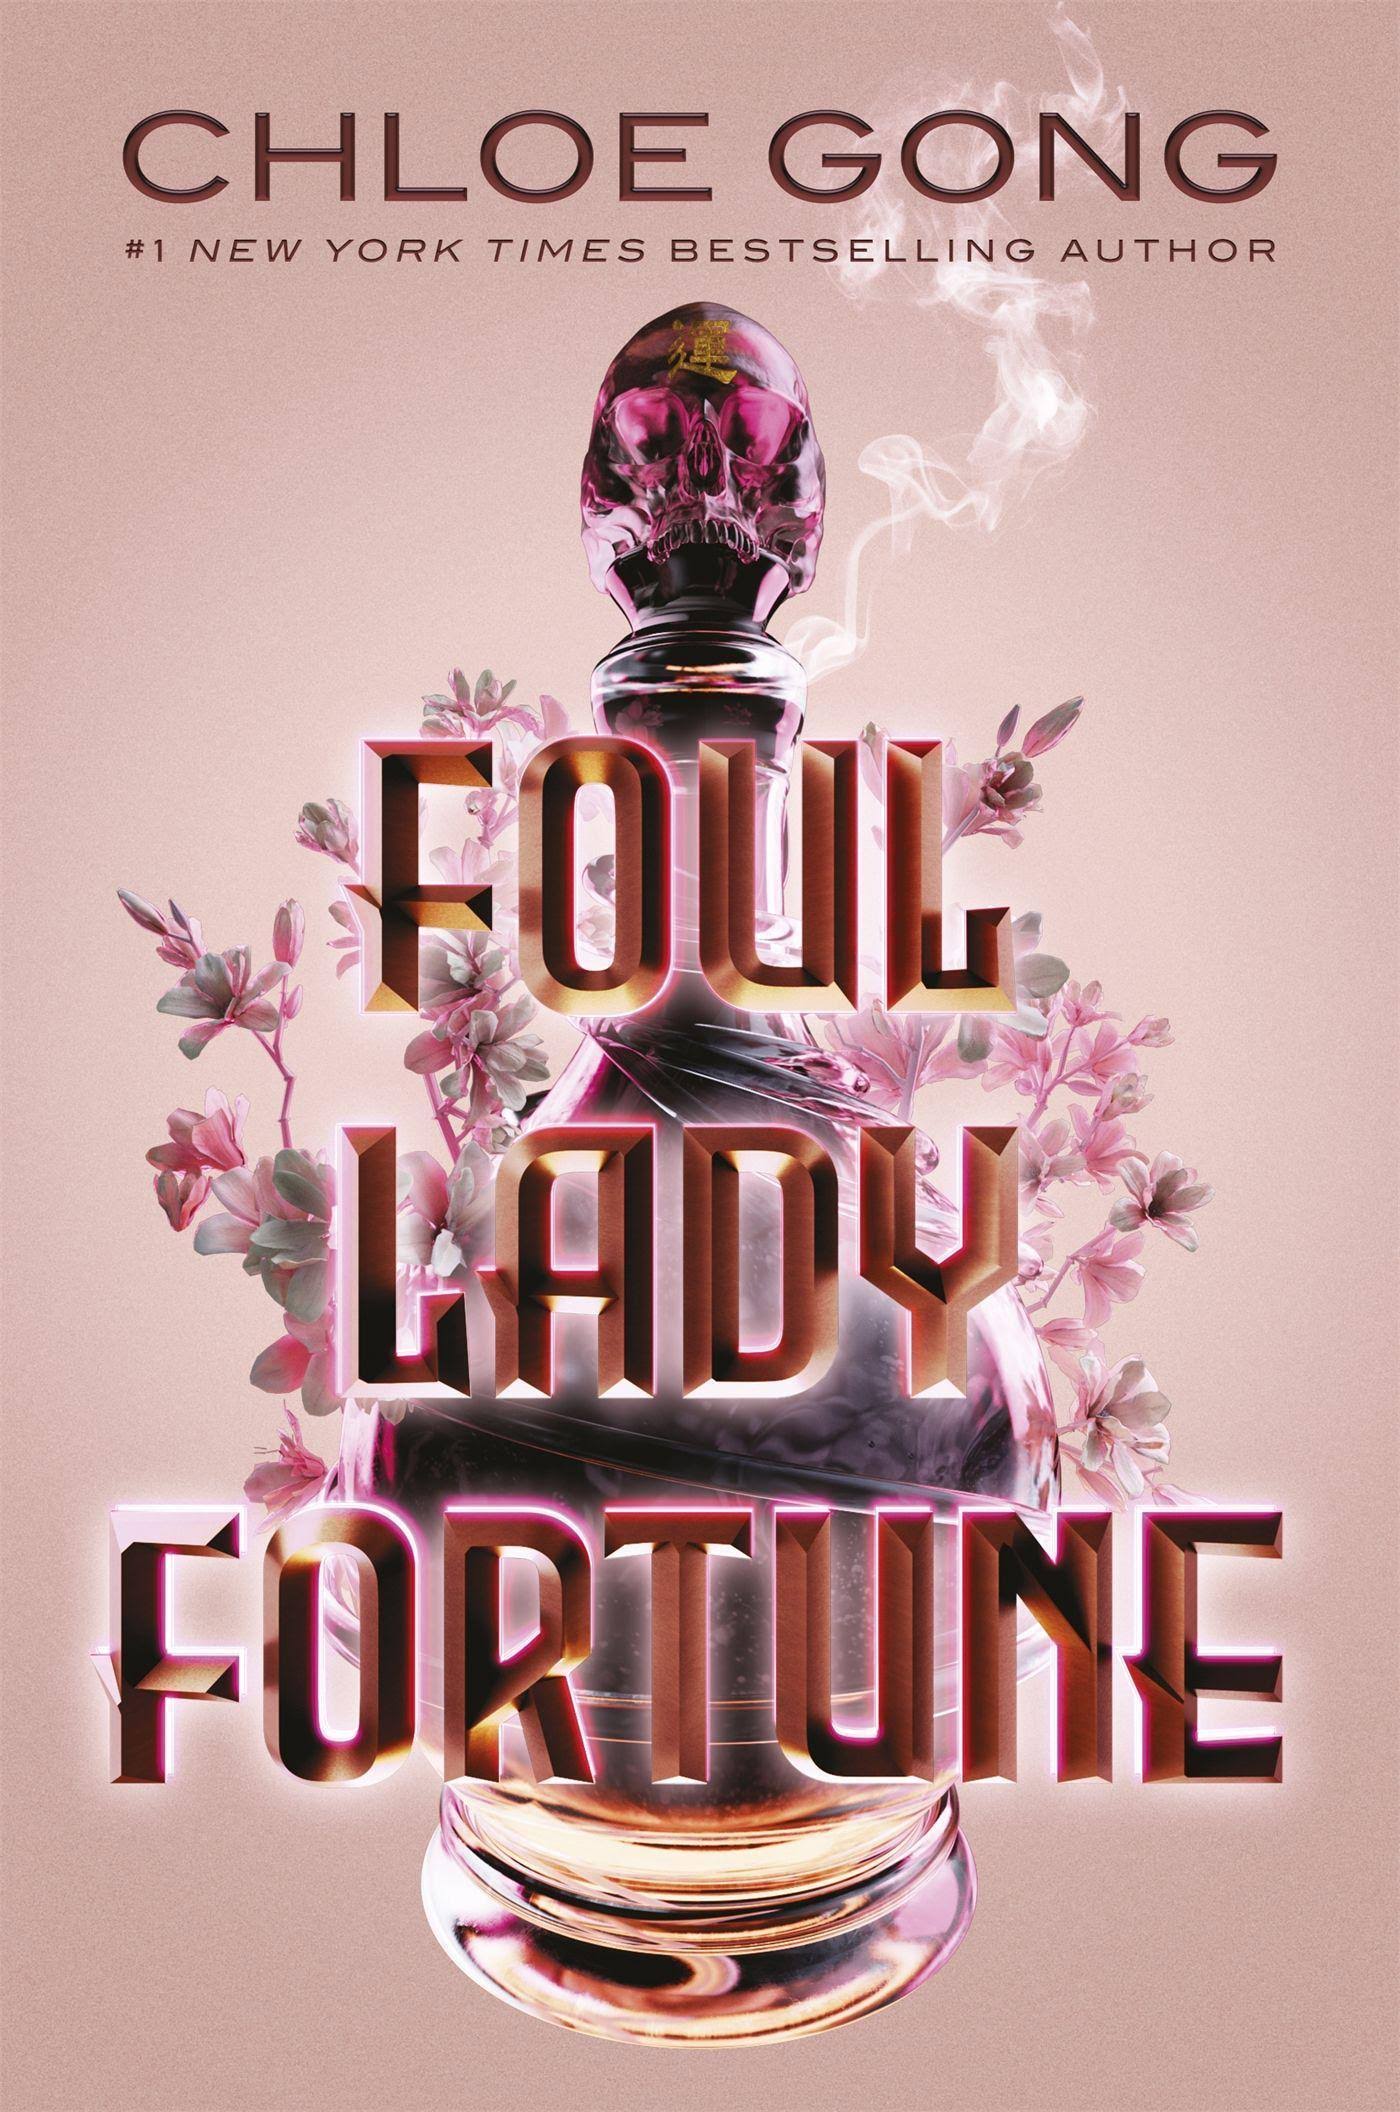 Foul Lady Fortune [Book]